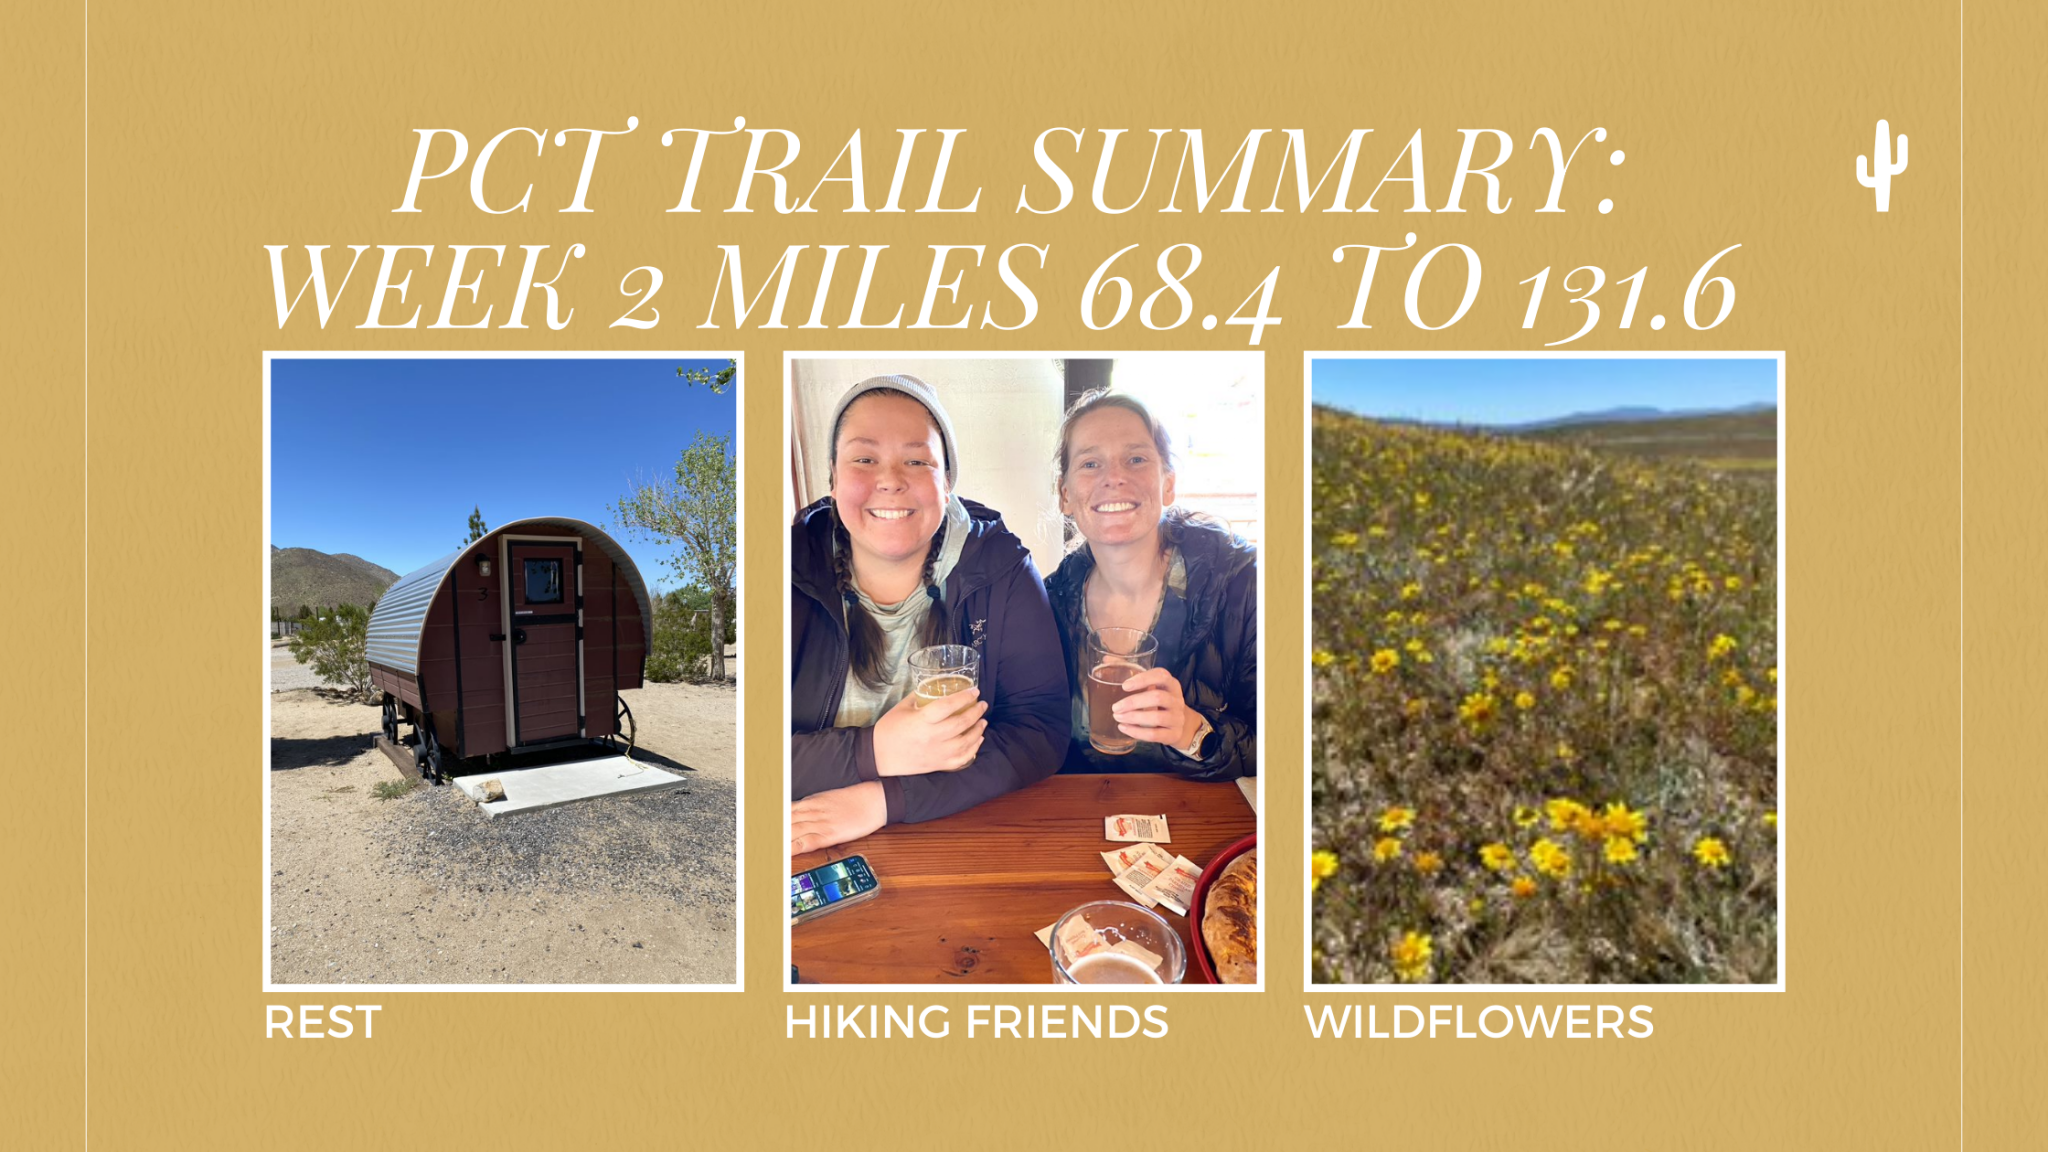 PCT Trail Summary Week 2 Miles 68.4 to 131.6